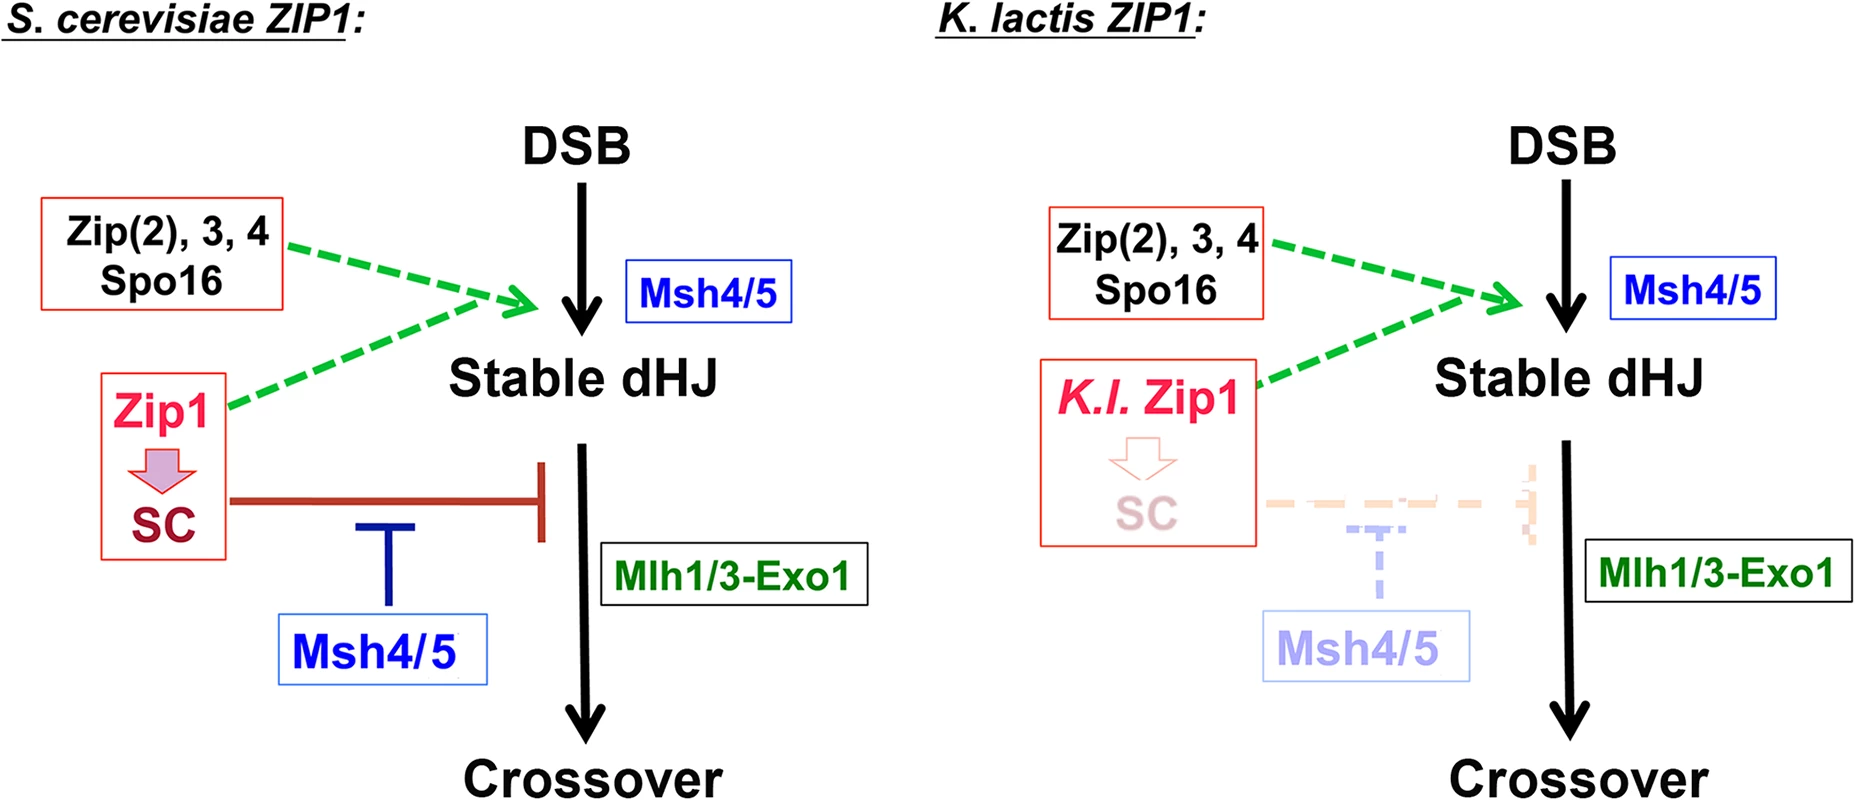 One model to explain the constrained relationship between MutSγ, SIC/Zip1-associated JMs, and MutLγ proteins and how <i>K</i>. <i>l</i>. Zip1 might bypass the constraint.